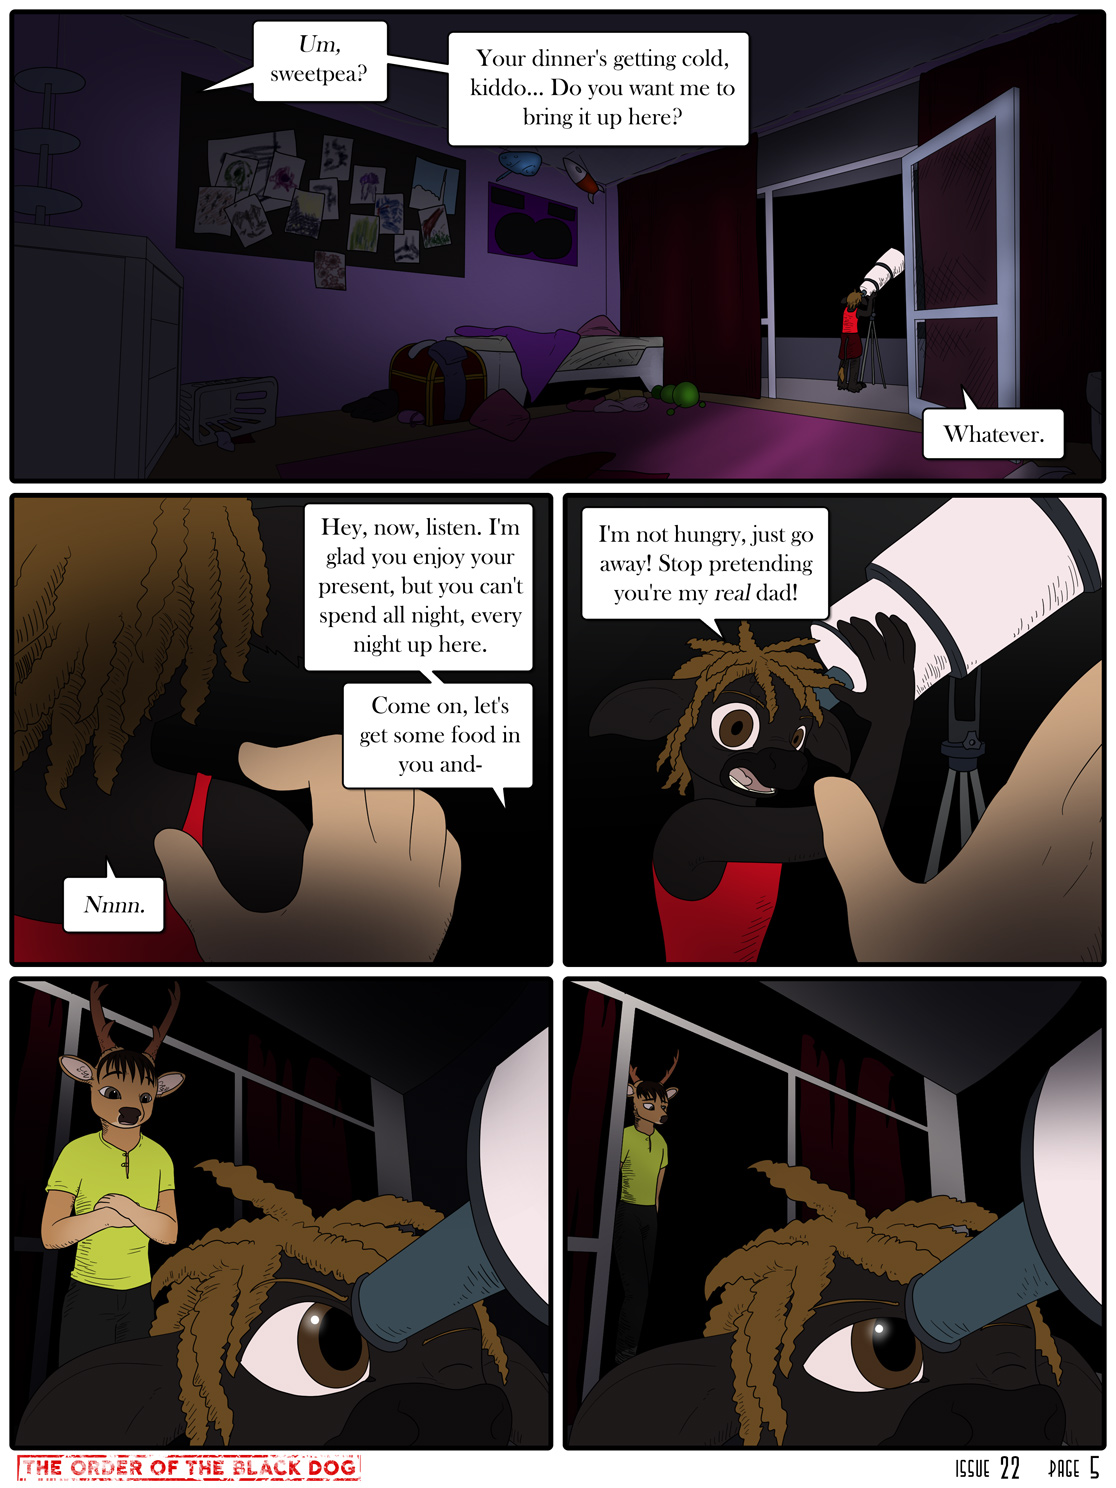 Issue 22, Page 5